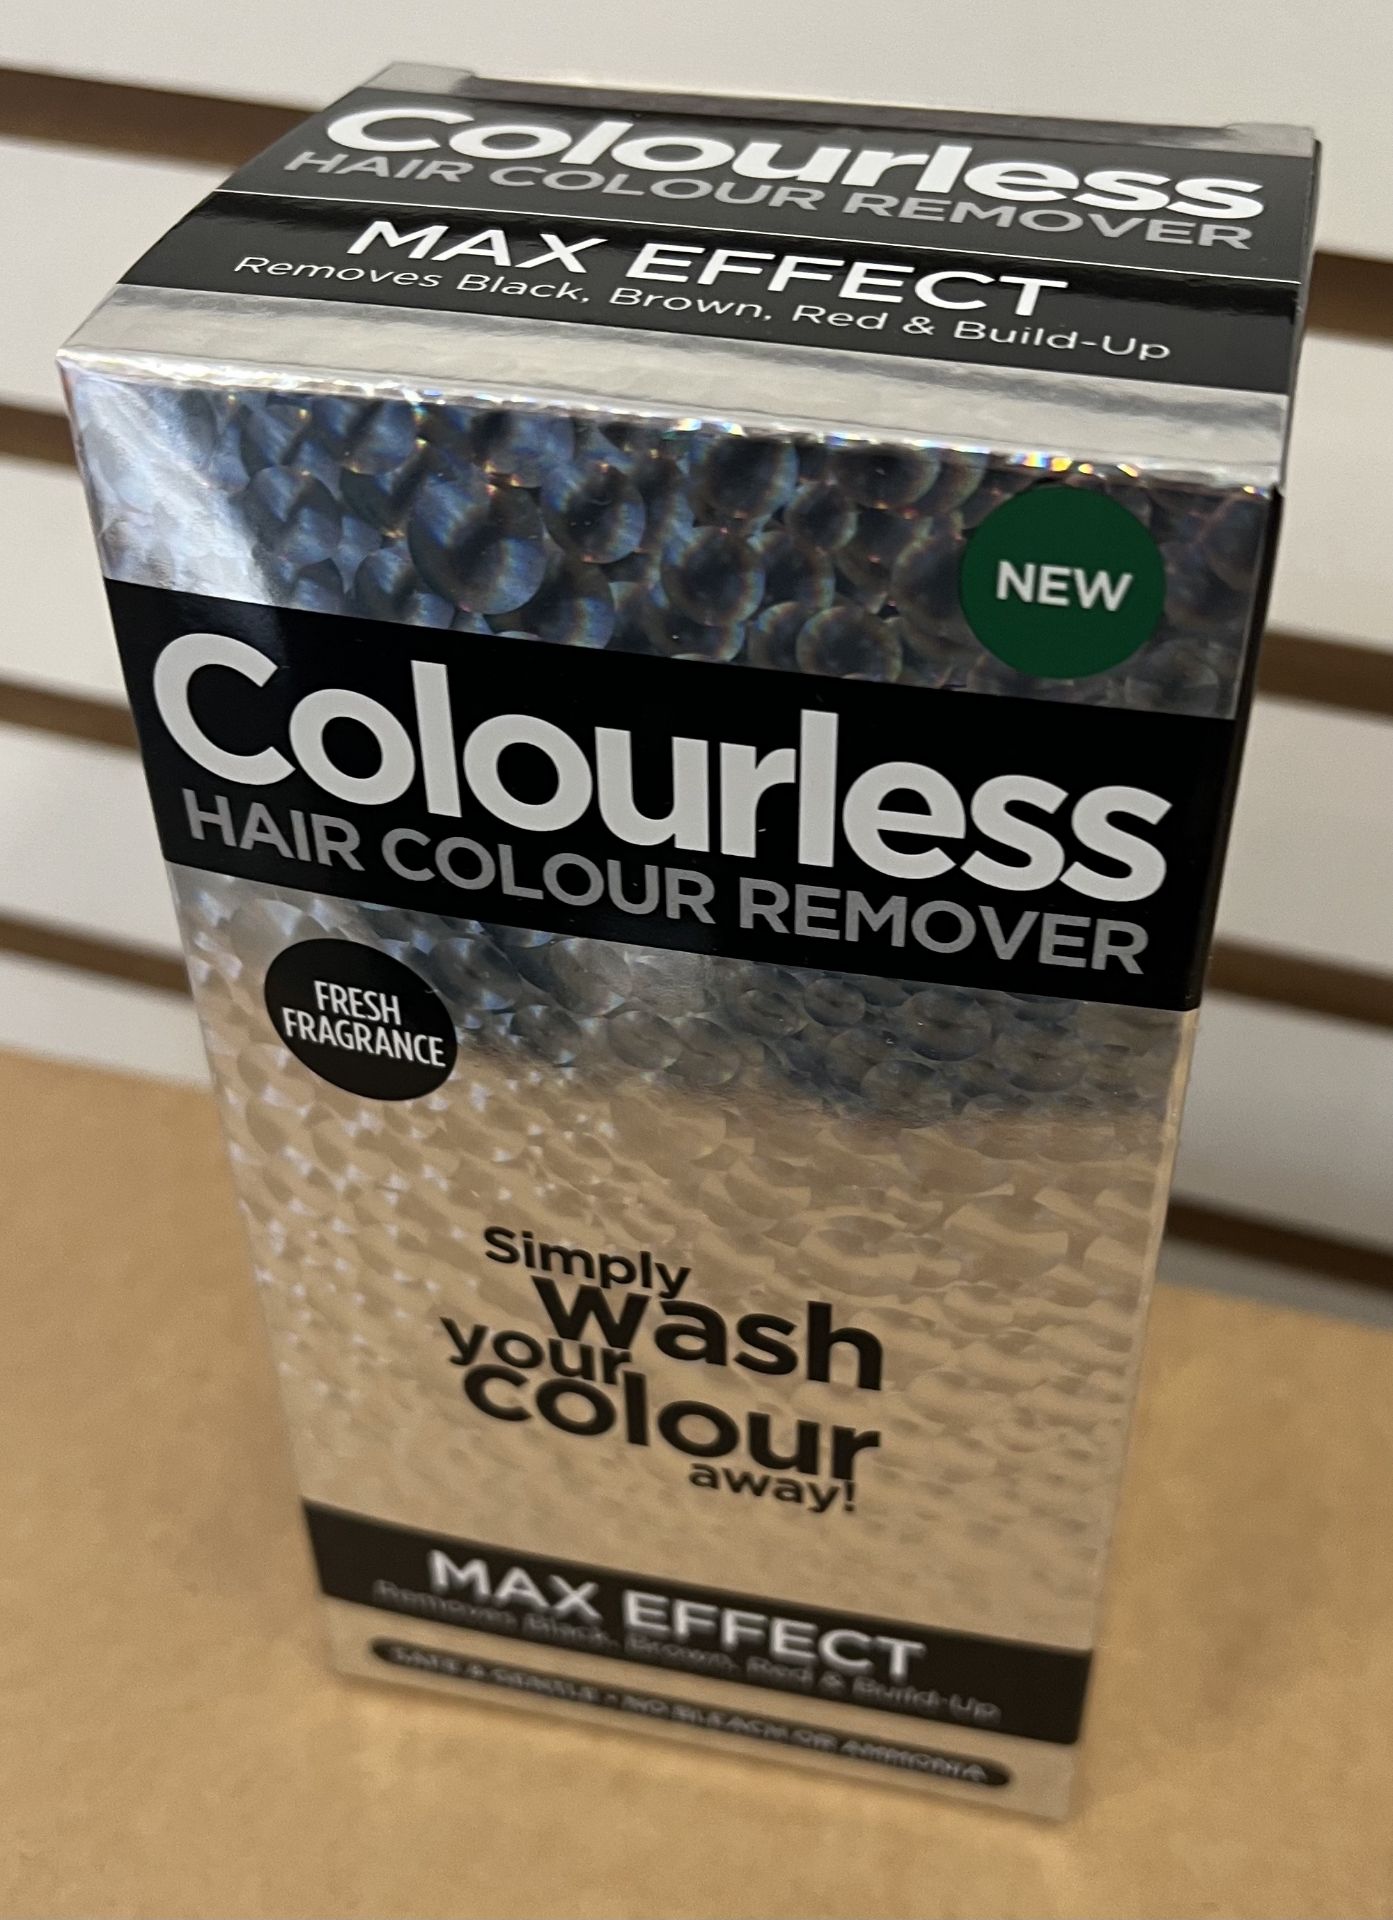 10 x Revolution London Colourless Max Effect Hair Colour Remover - RRP Â£159.90 ! - Image 4 of 7